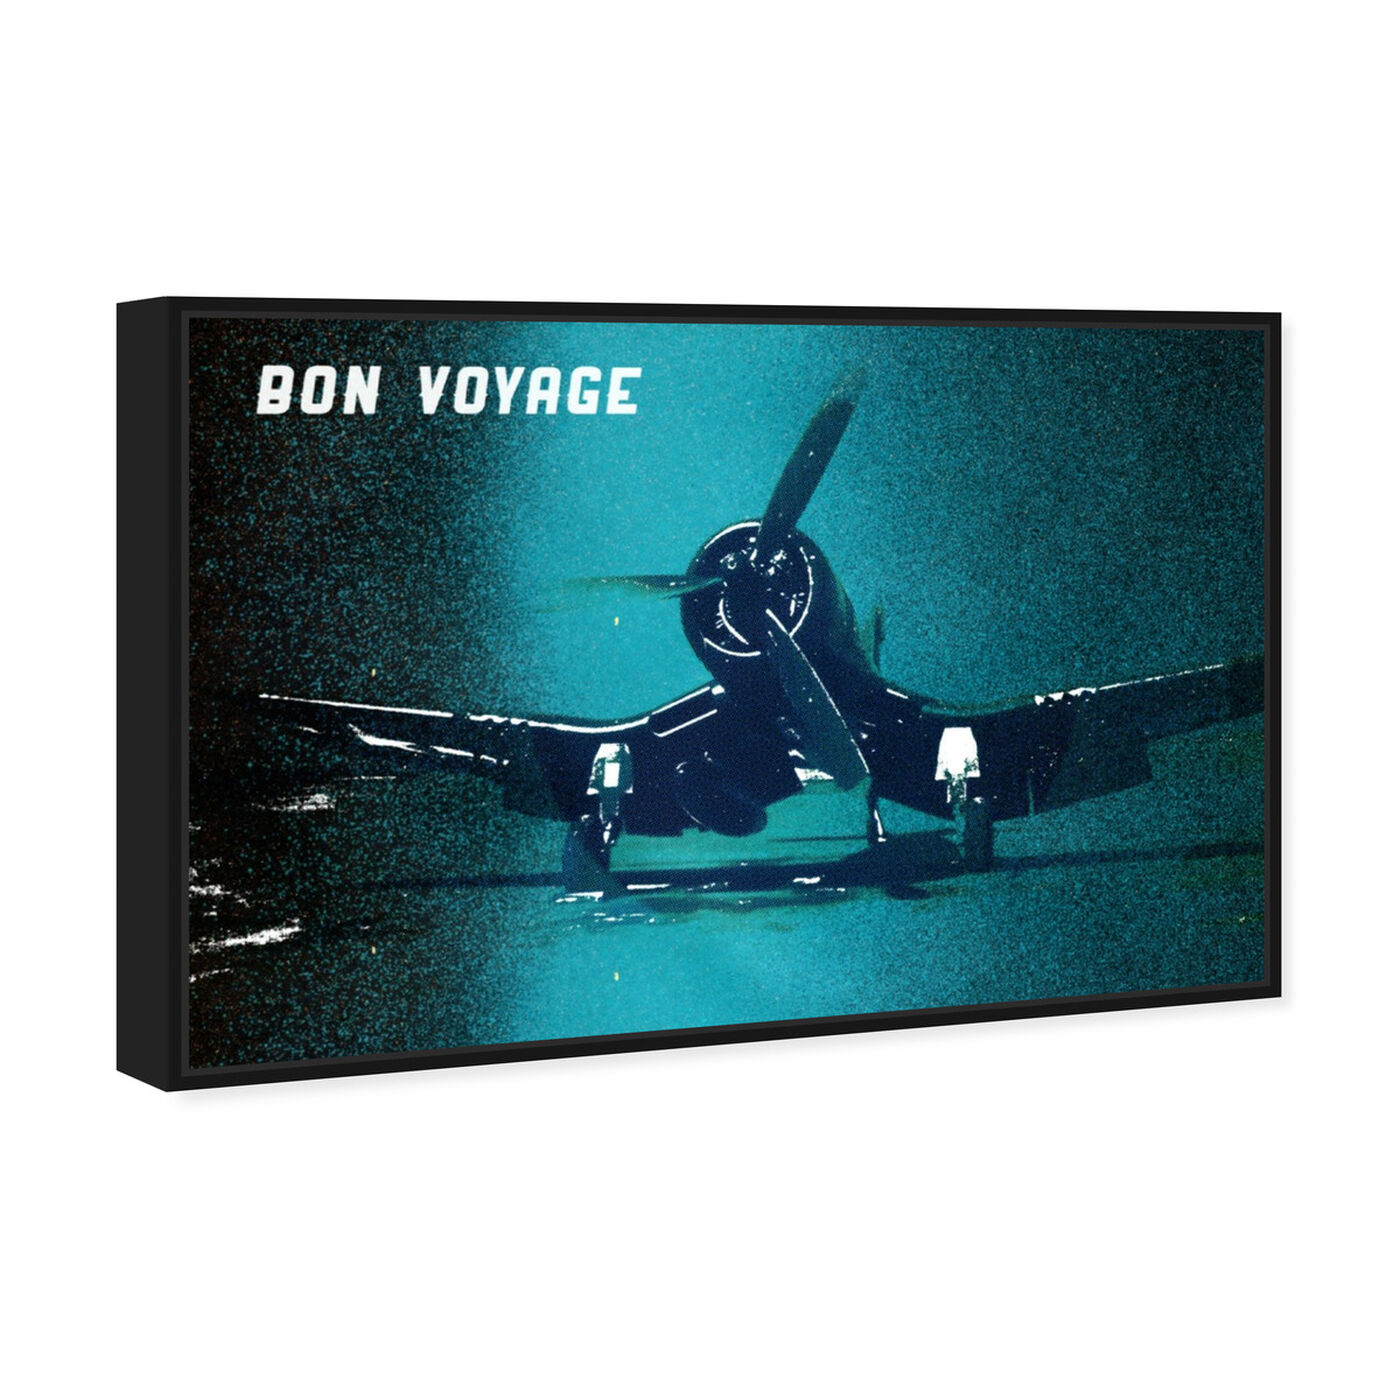 Angled view of Bon Voyage featuring transportation and airplanes art.